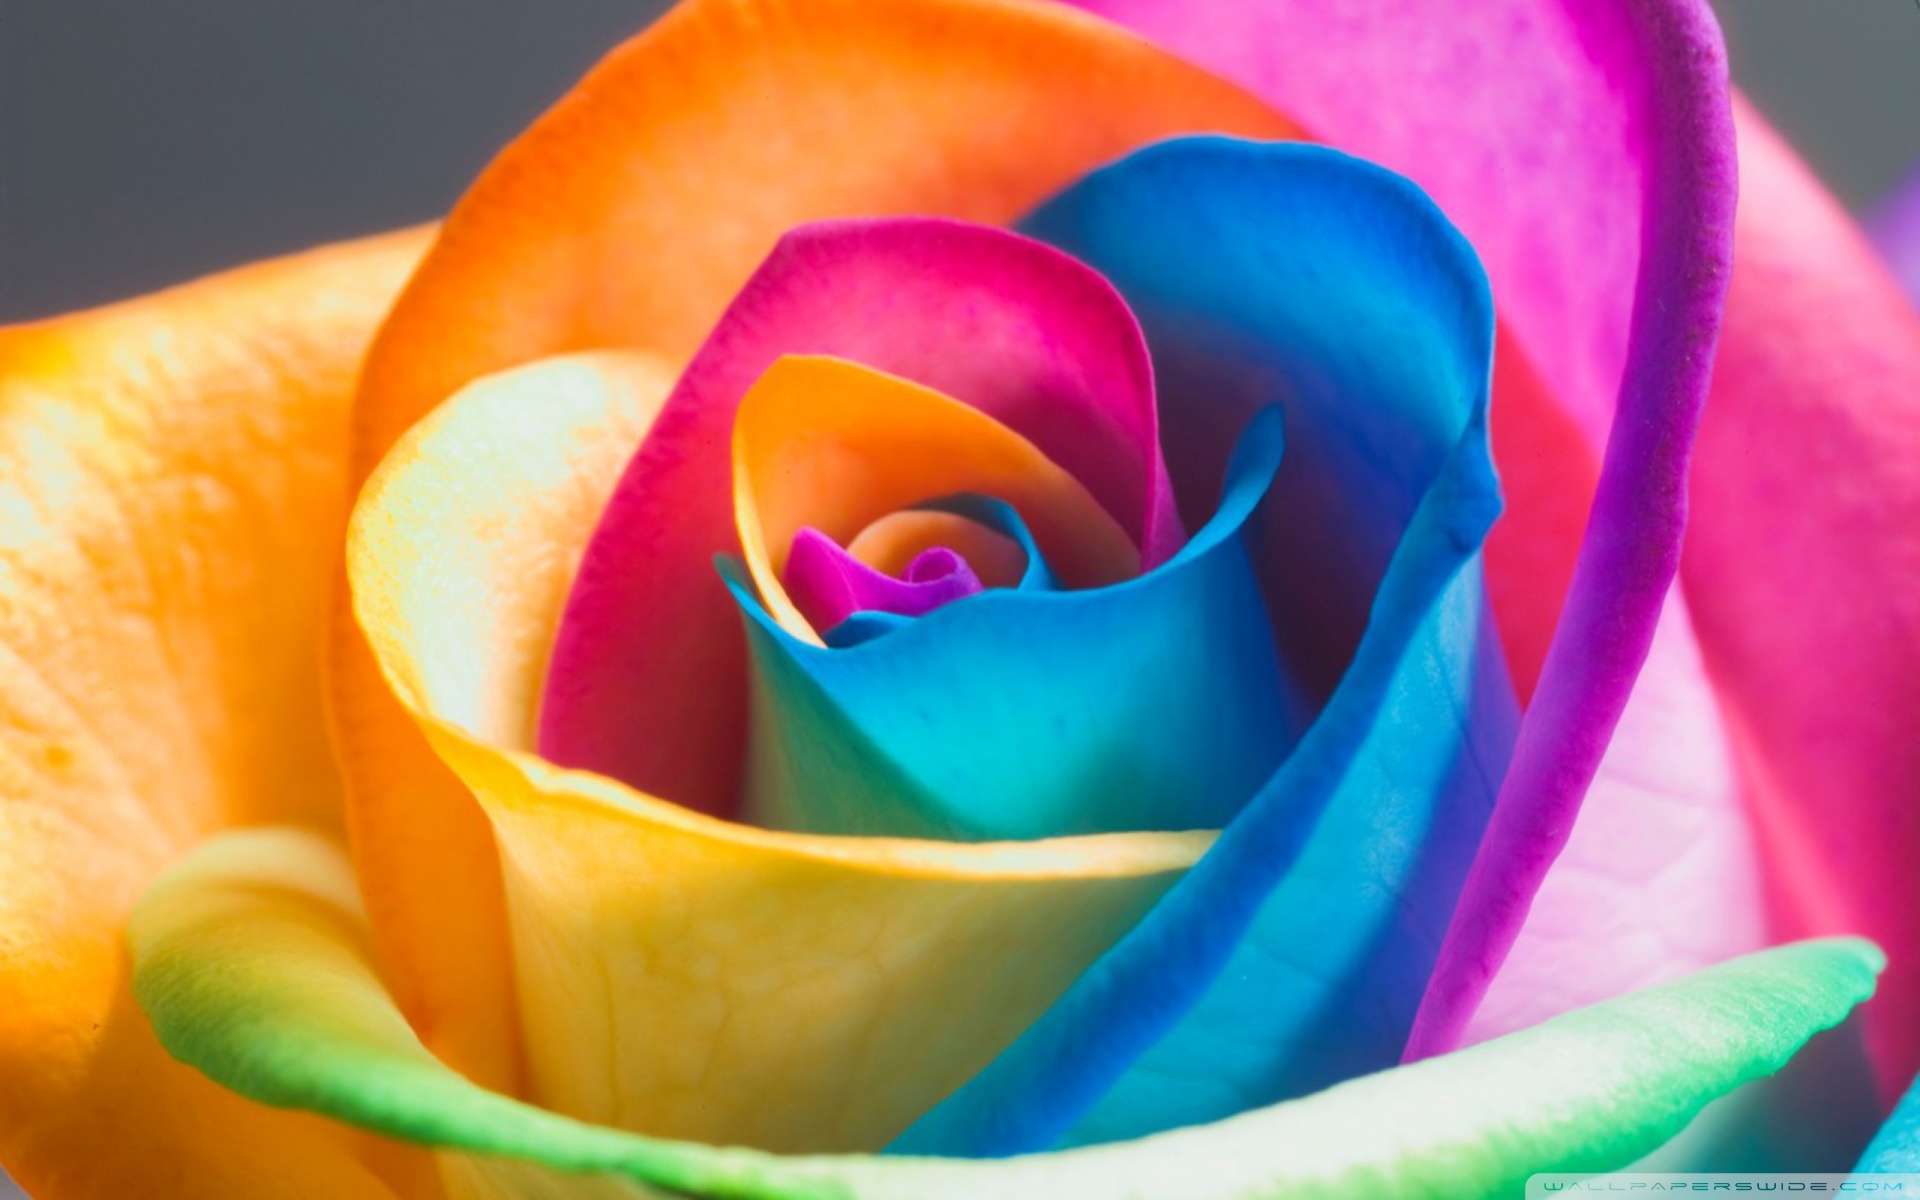 Beautiful Rainbow Roses Wallpaper Widescreen Pictures In High